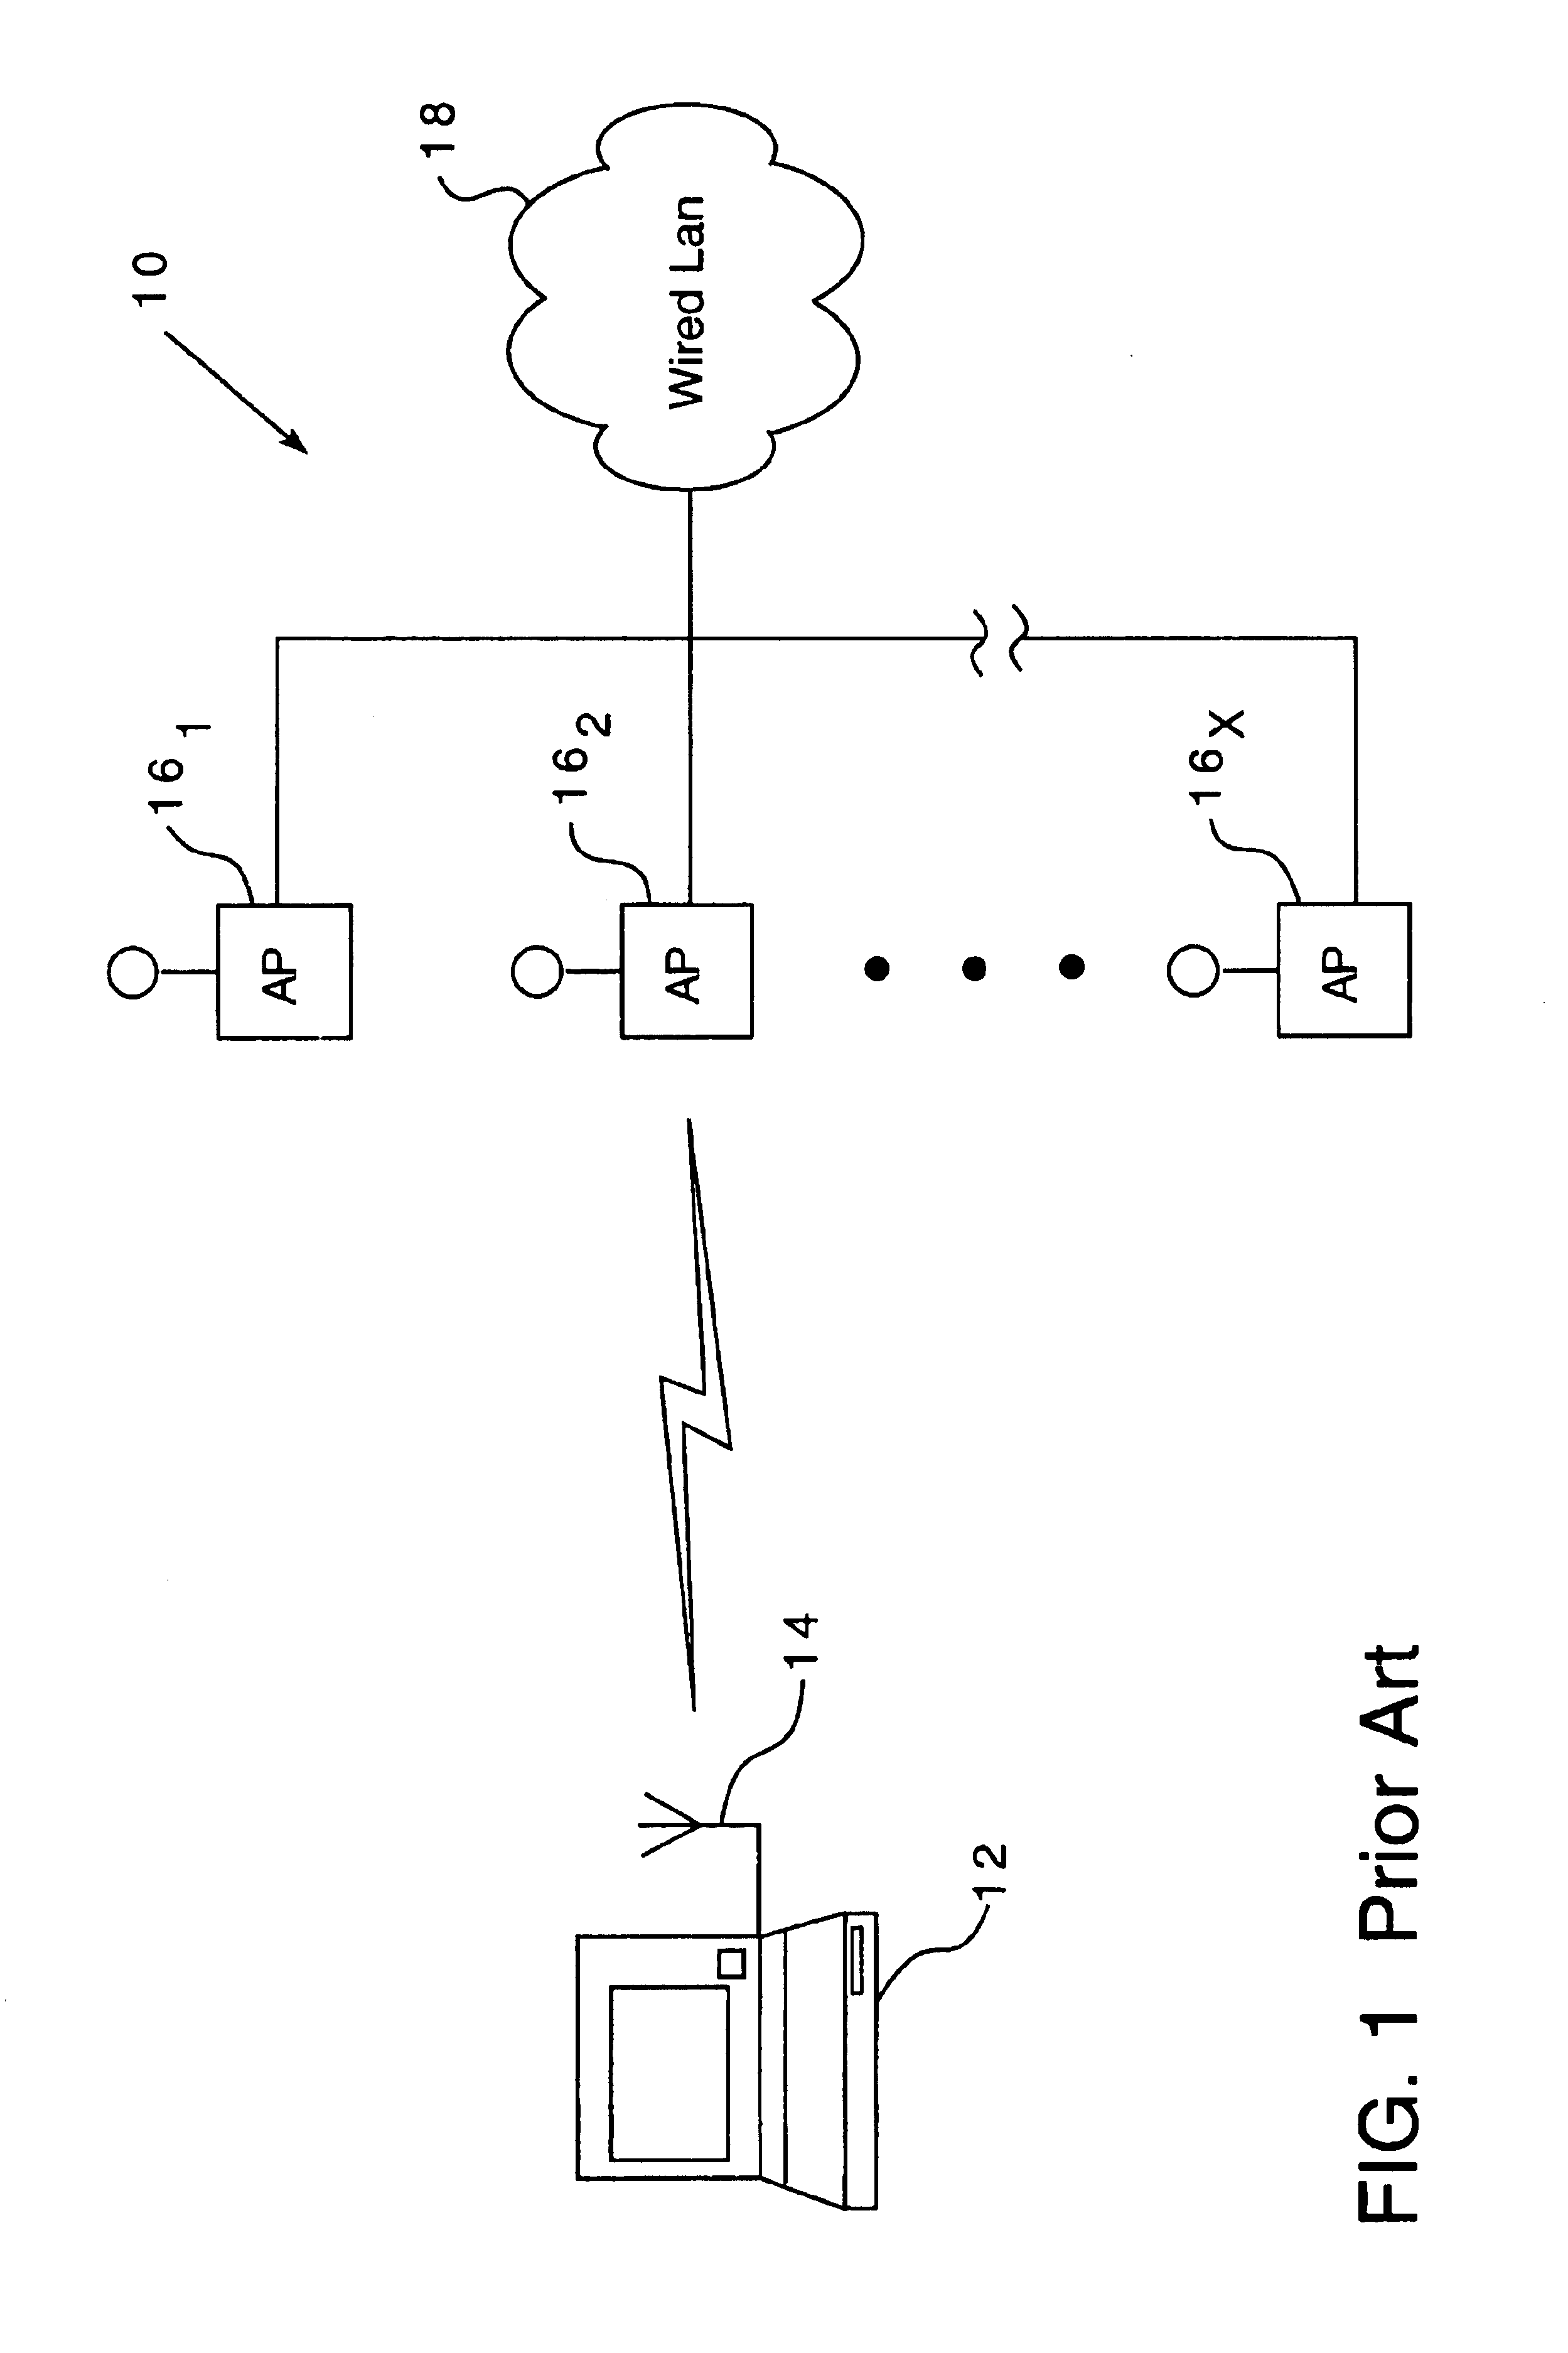 Method for configuring a wireless network